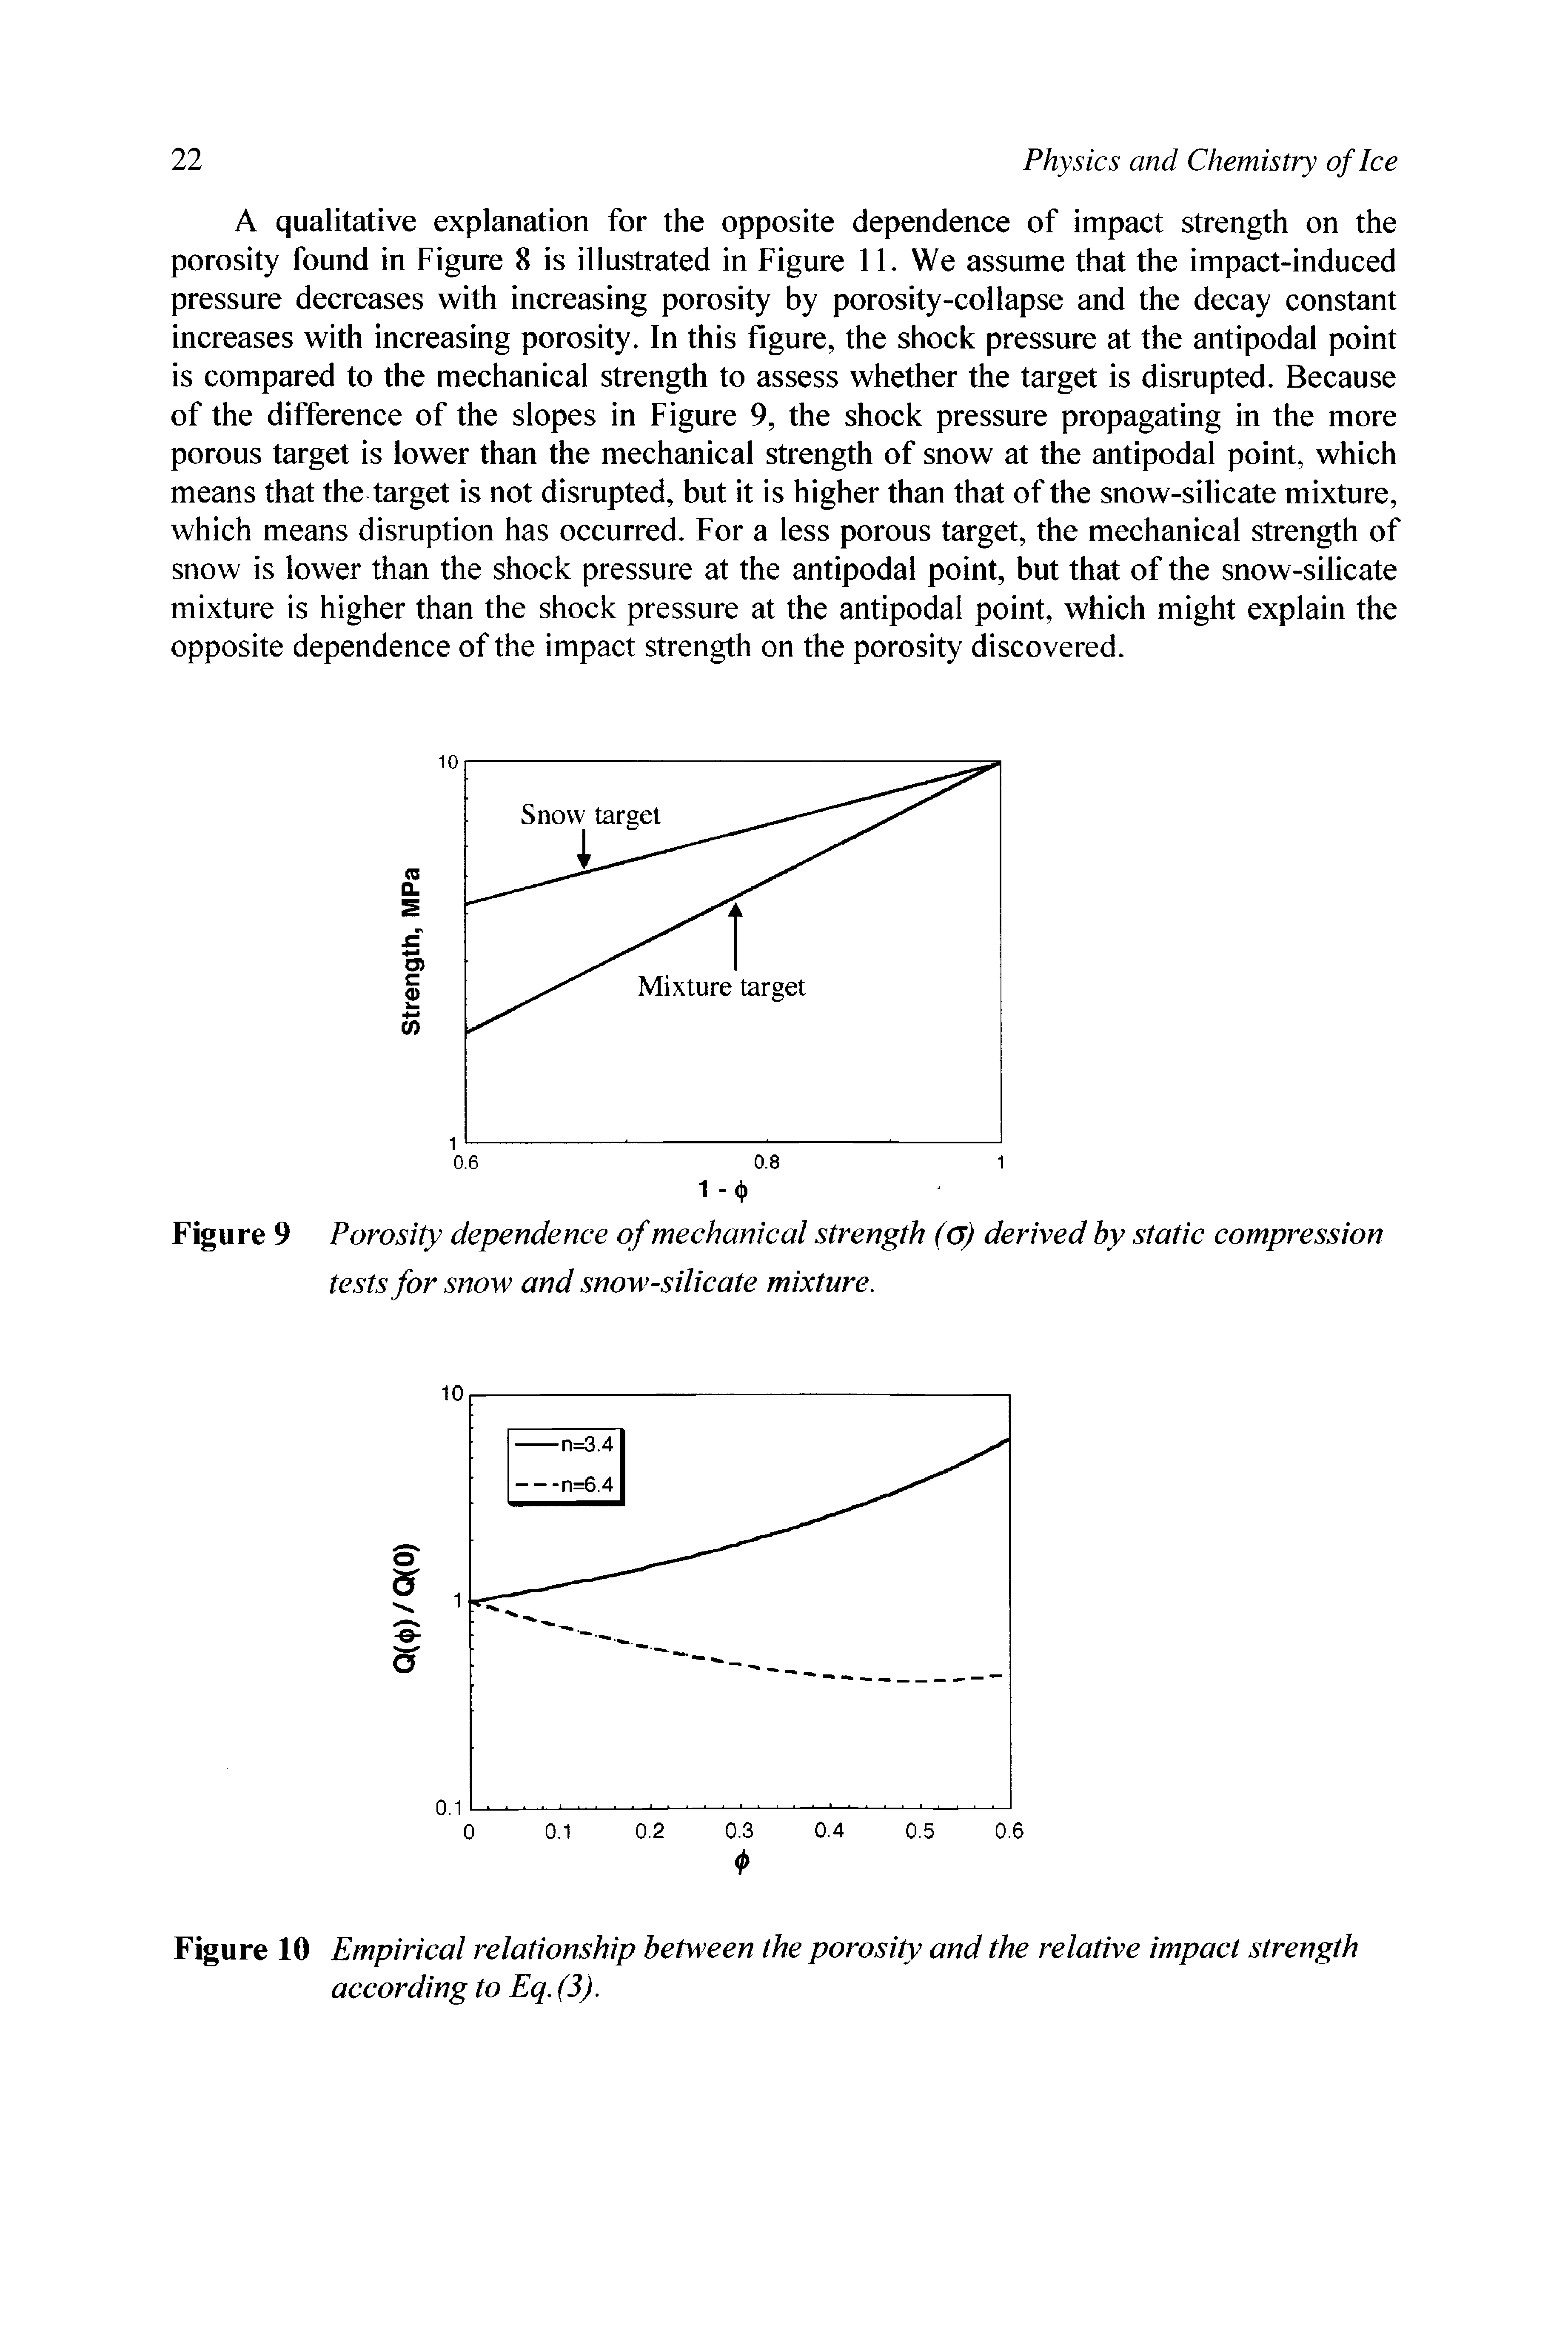 Figure 9 Porosity dependence of mechanical strength (a) derived by static compression tests for snow and snow-silicate mixture.